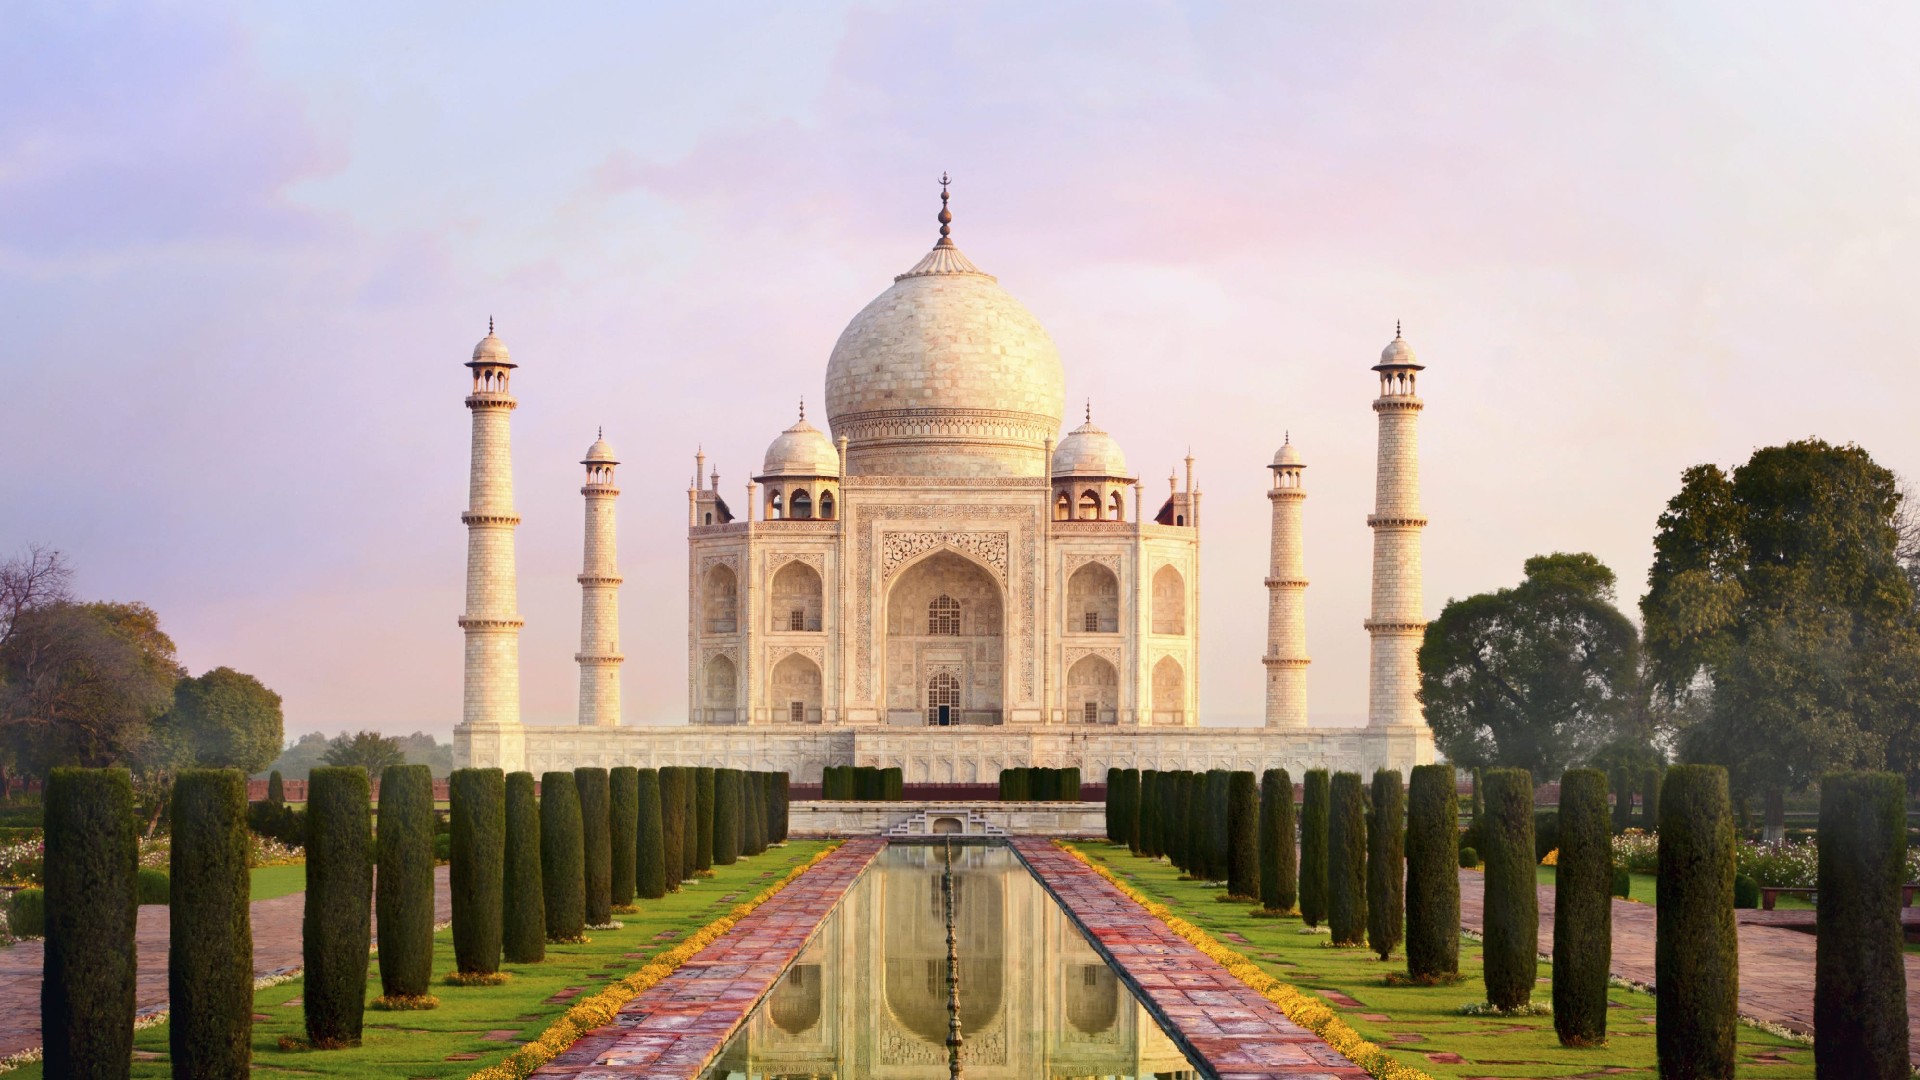 11 Top-Rated Attractions & Places to Visit in Agra